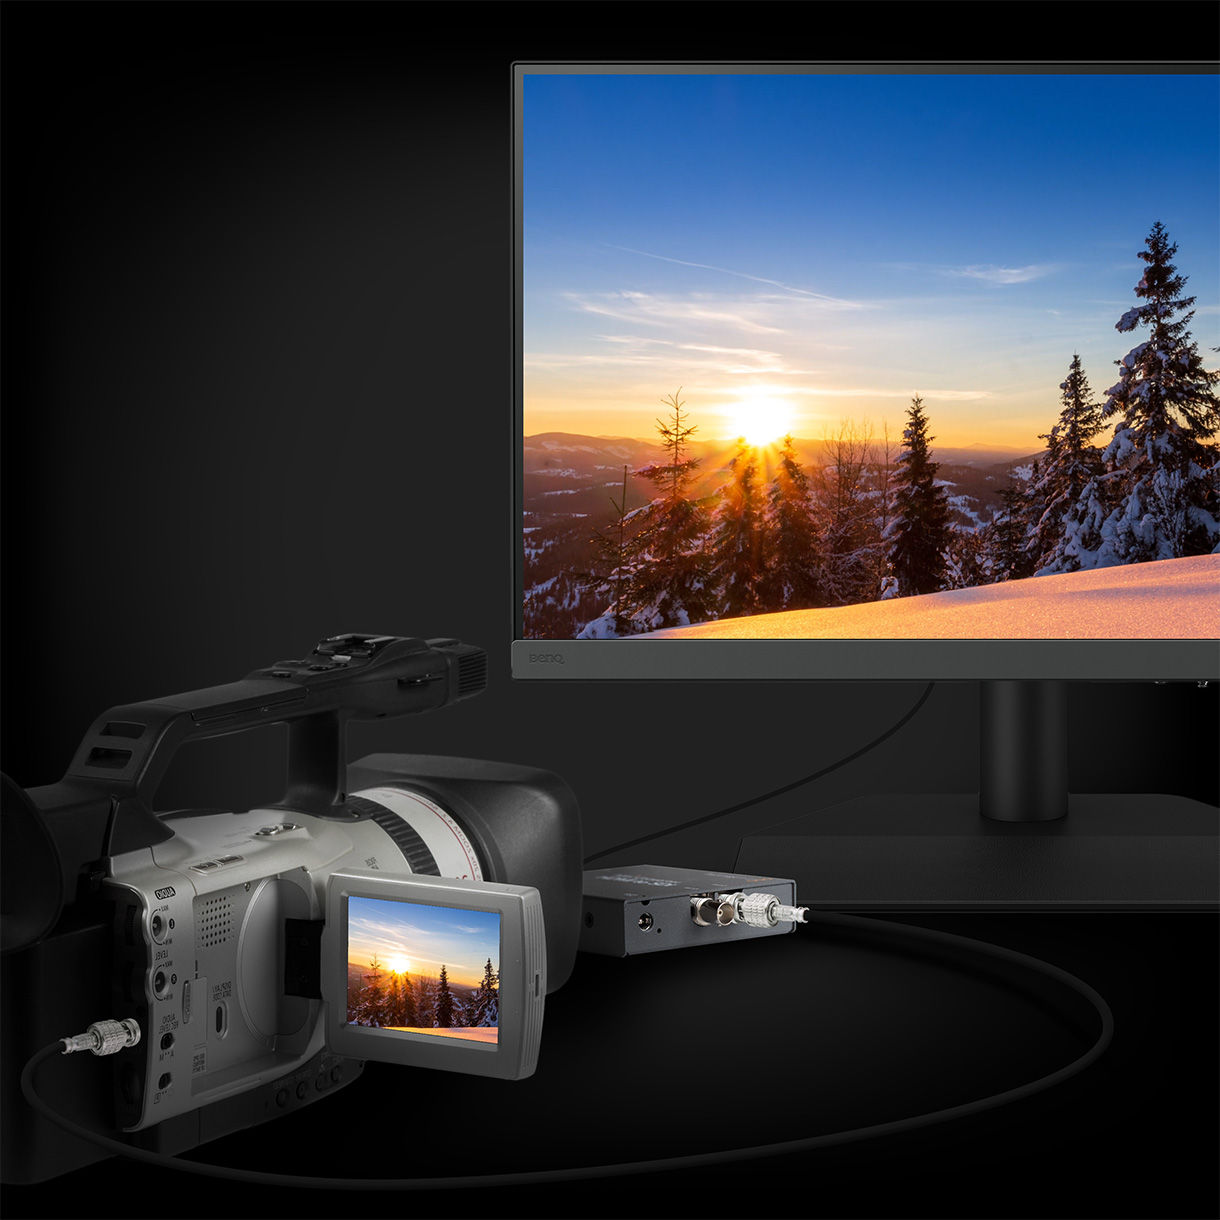 BenQ has tested select SDI to HDMI devices as compatible with SW242Q. Videographers can thus connect their SDI devices to the monitor for stable and non-compressed signal transmission and real quality video image. 